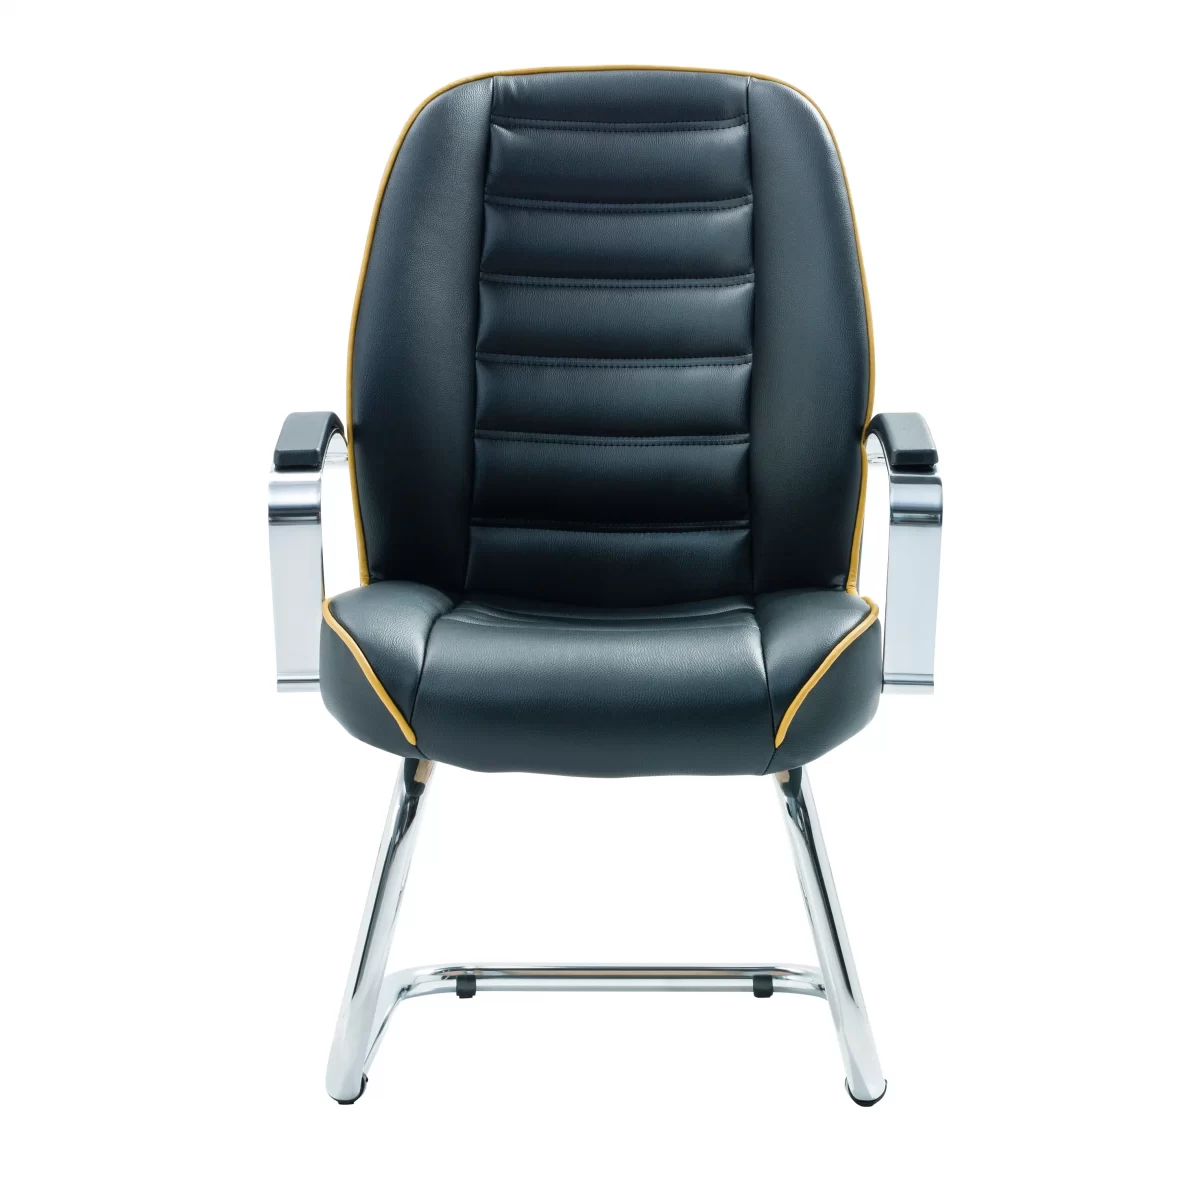 Karina Office Waiting Chair Modern Office Chairs Turkey scaled